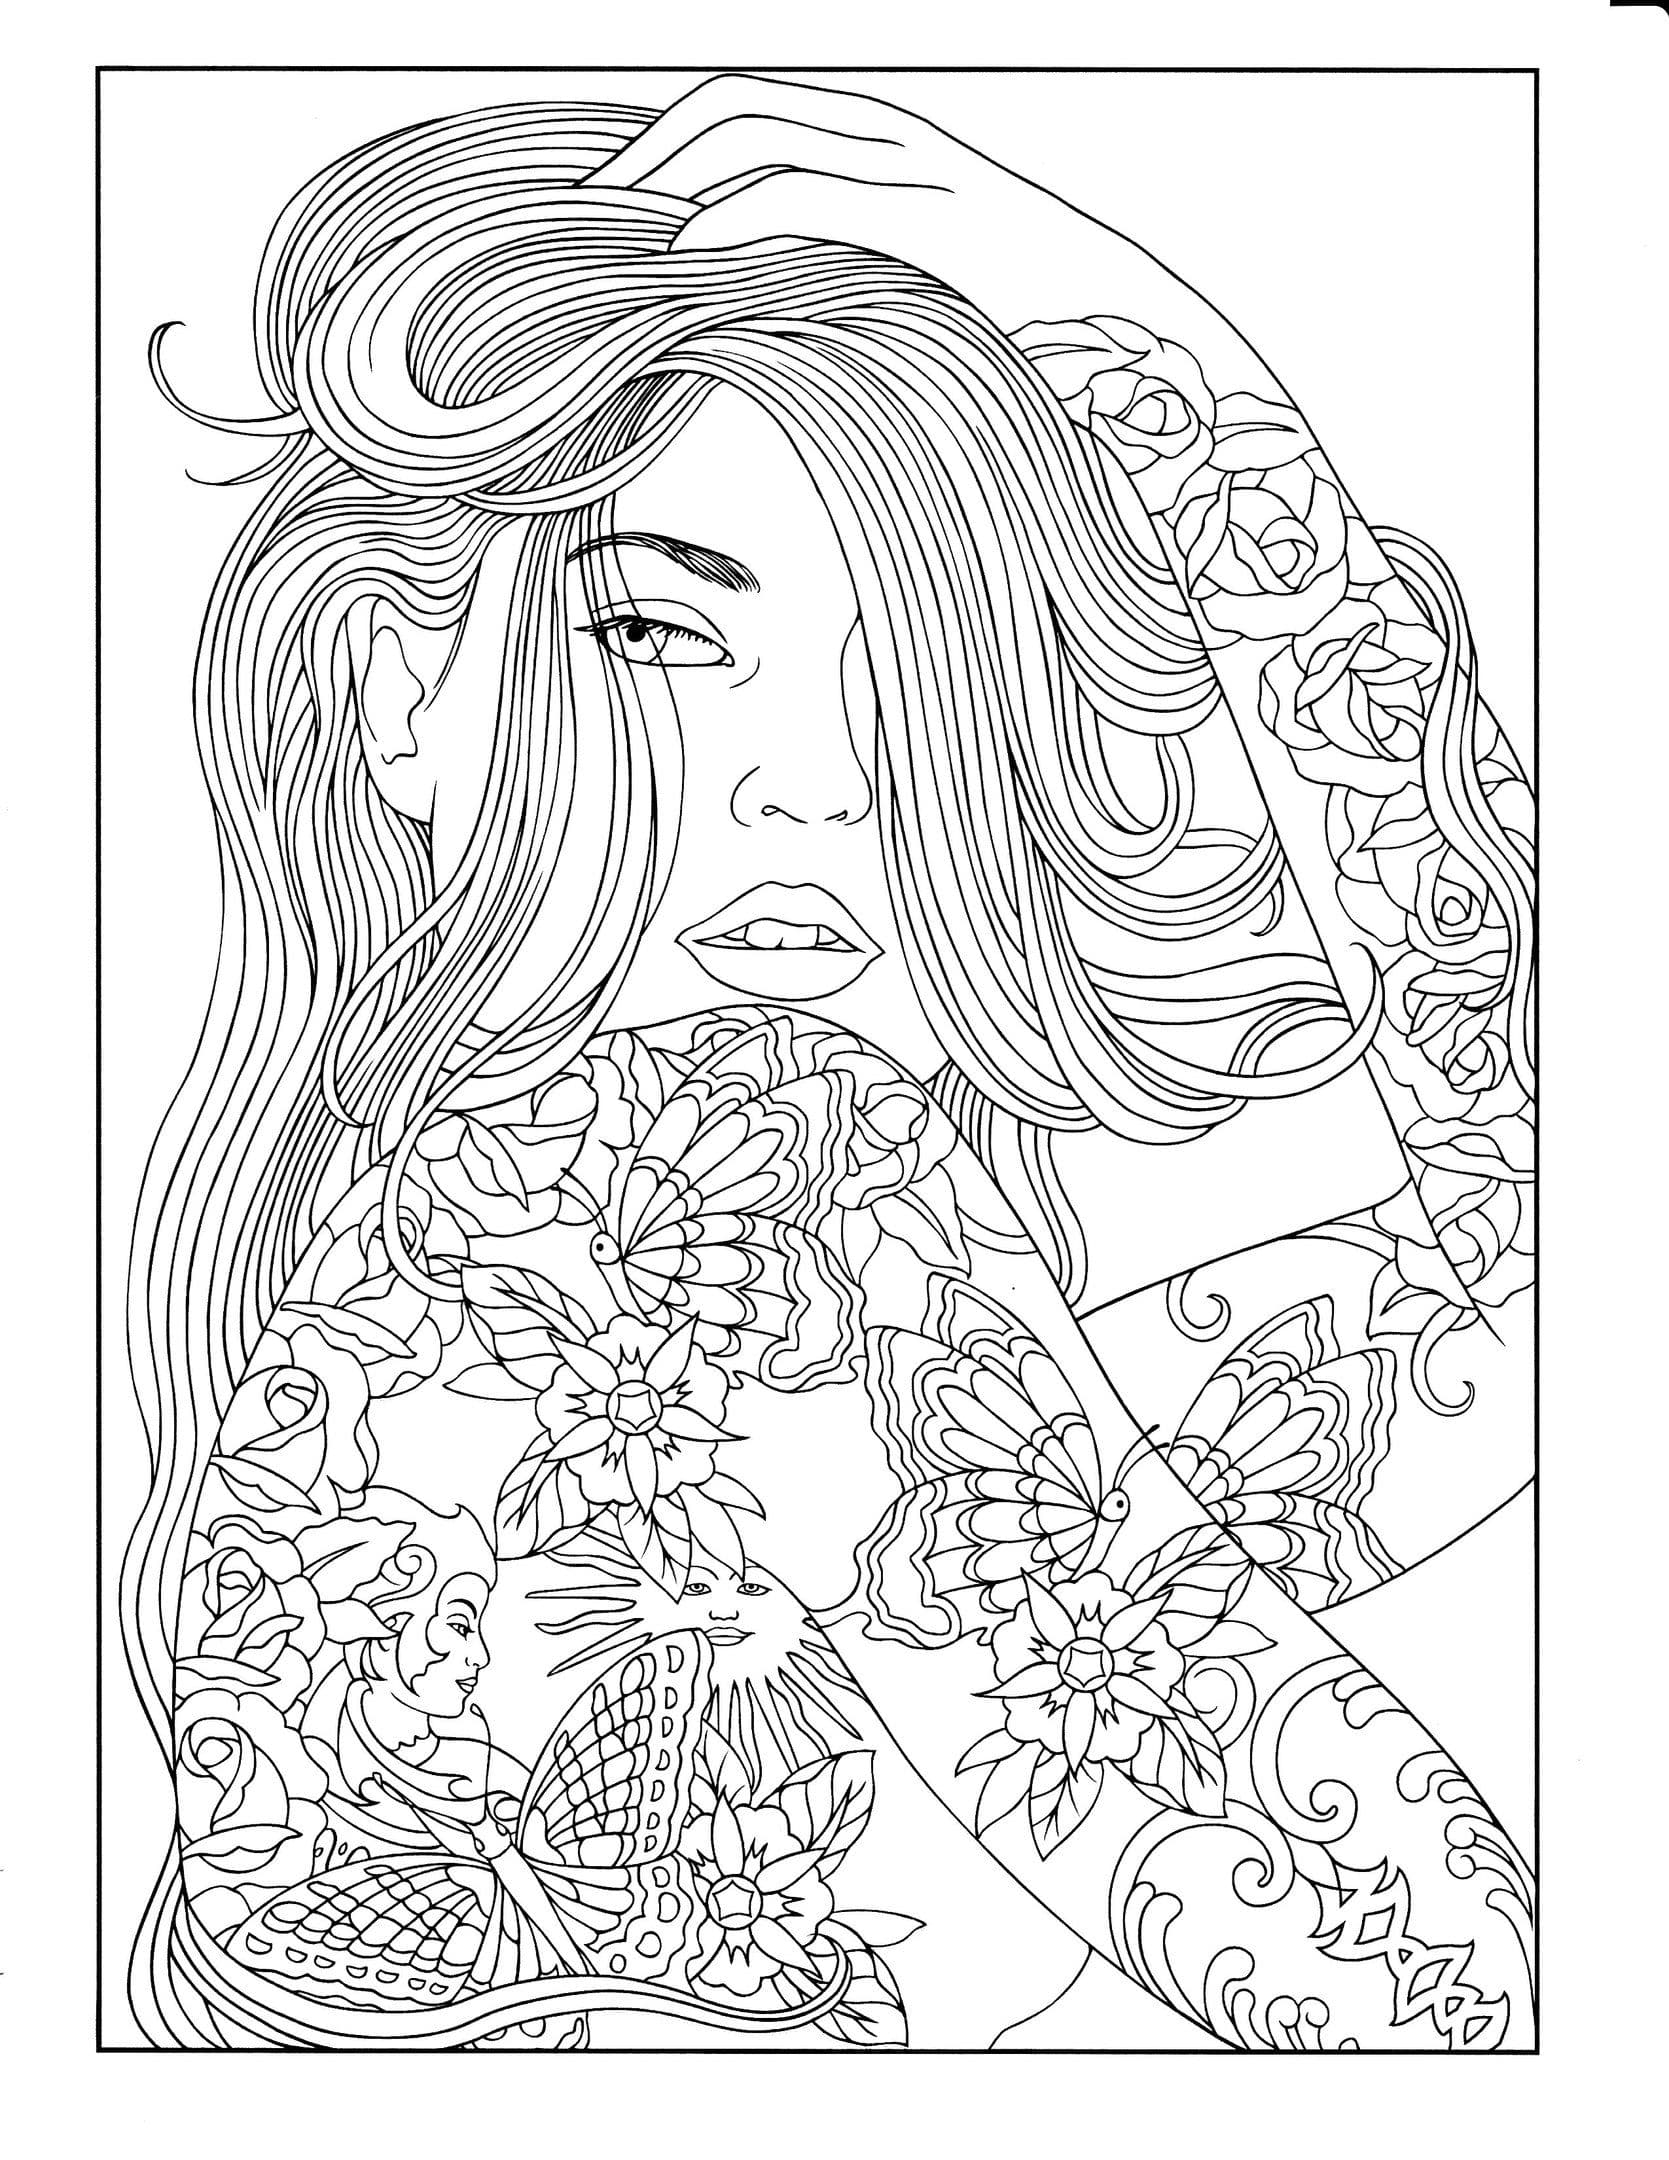 Hard Coloring Pages For Girls   20 images Free Printable